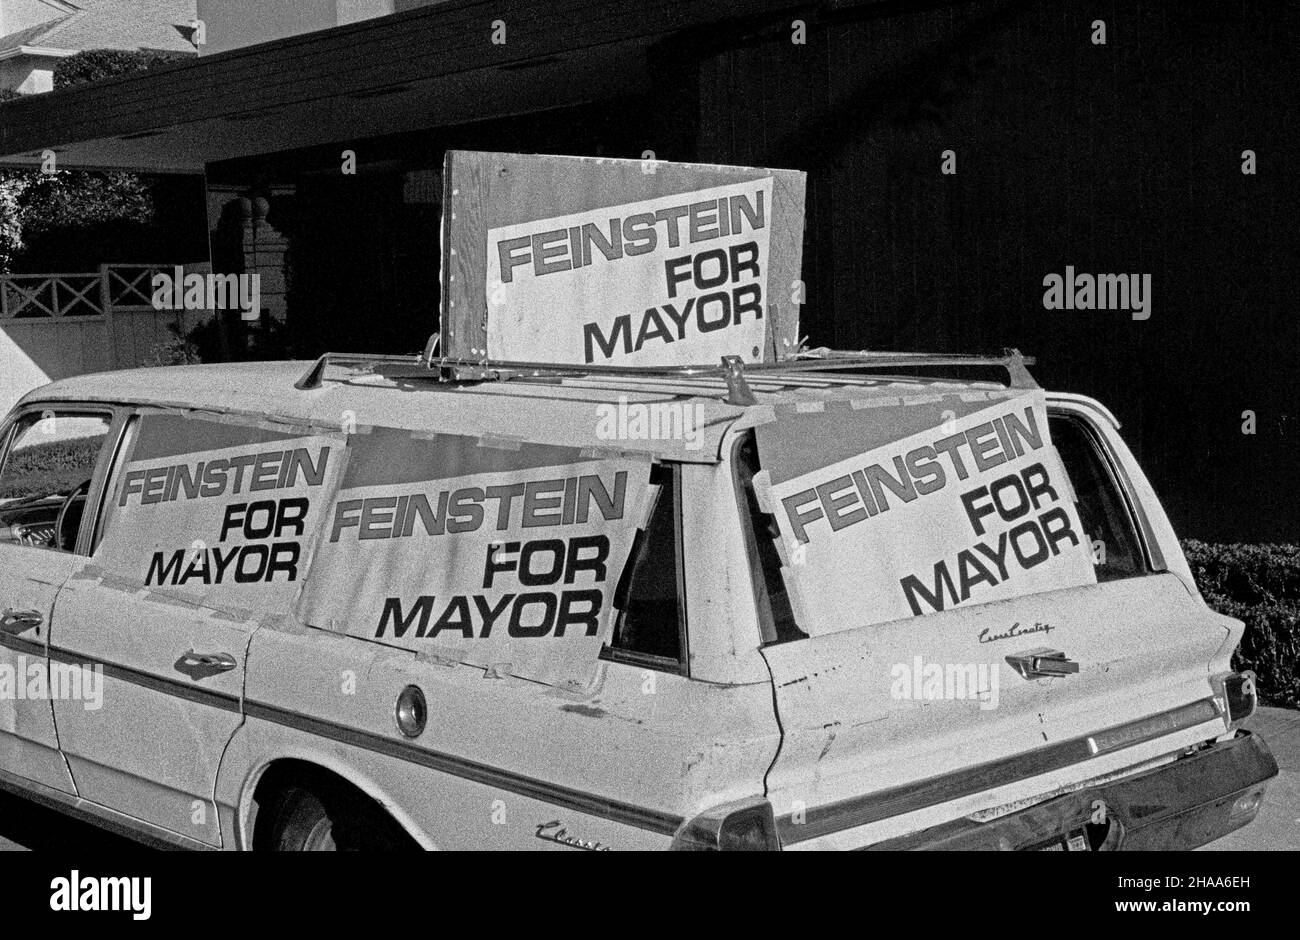 Dianne Feinstein for San Francisco Mayor campaign posters on a station wagon in San Francisco, California, 1970s Stock Photo